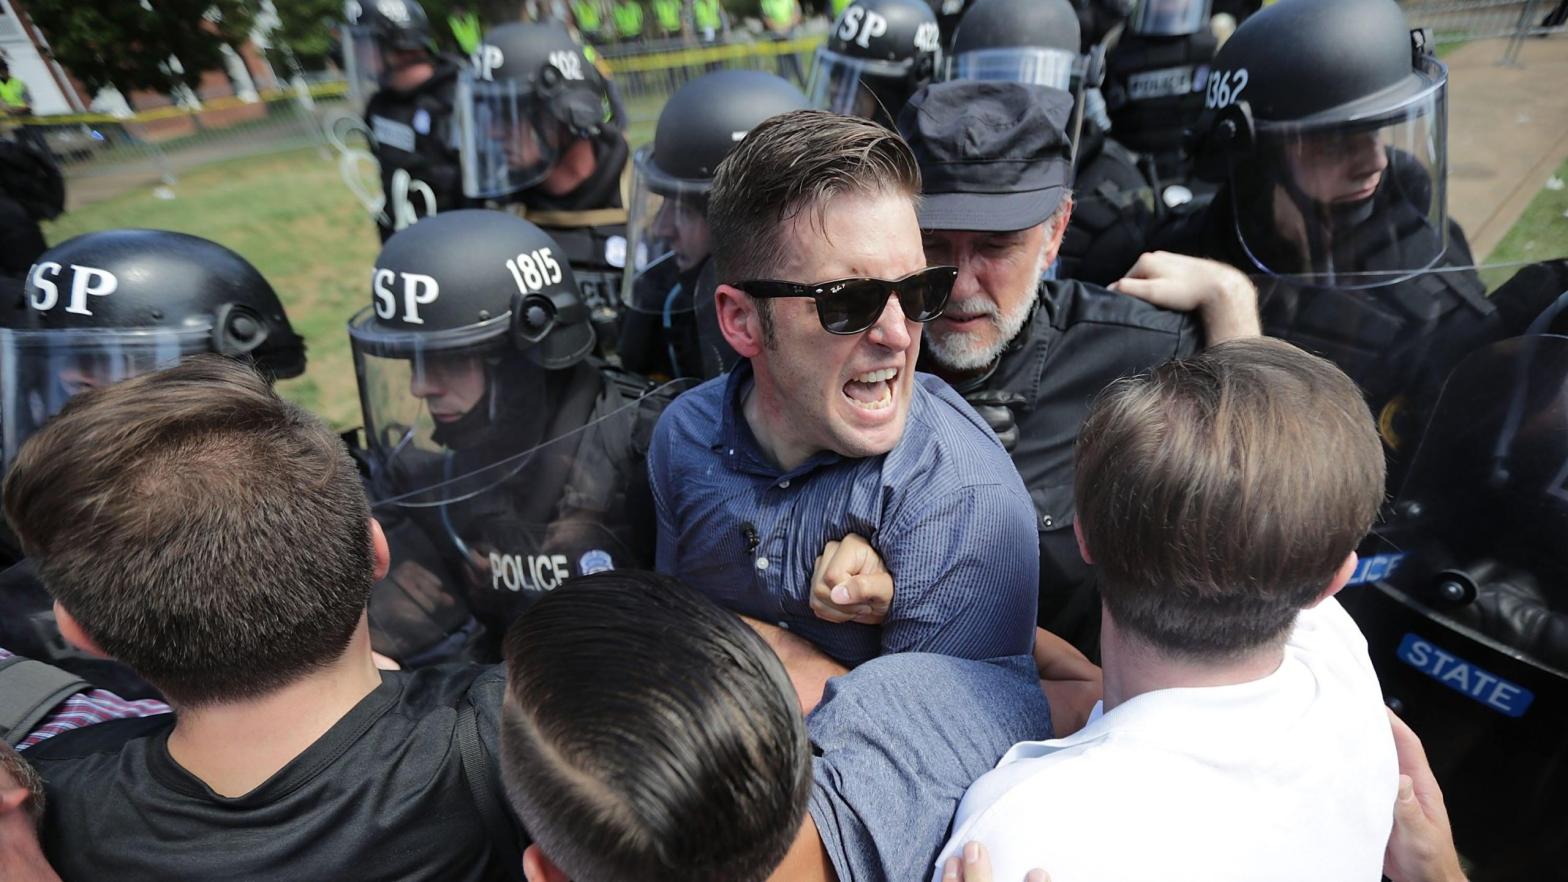 White supremacist Richard Sspencer, seen here as he and his supporters fight with Virginia State Police in Charlottesville, Virginia's Emancipaton Park after Unite the Right was declared an unlawful gathering on Aug. 12, 2017. (Photo: Chip de Somodevilla, Getty Images)